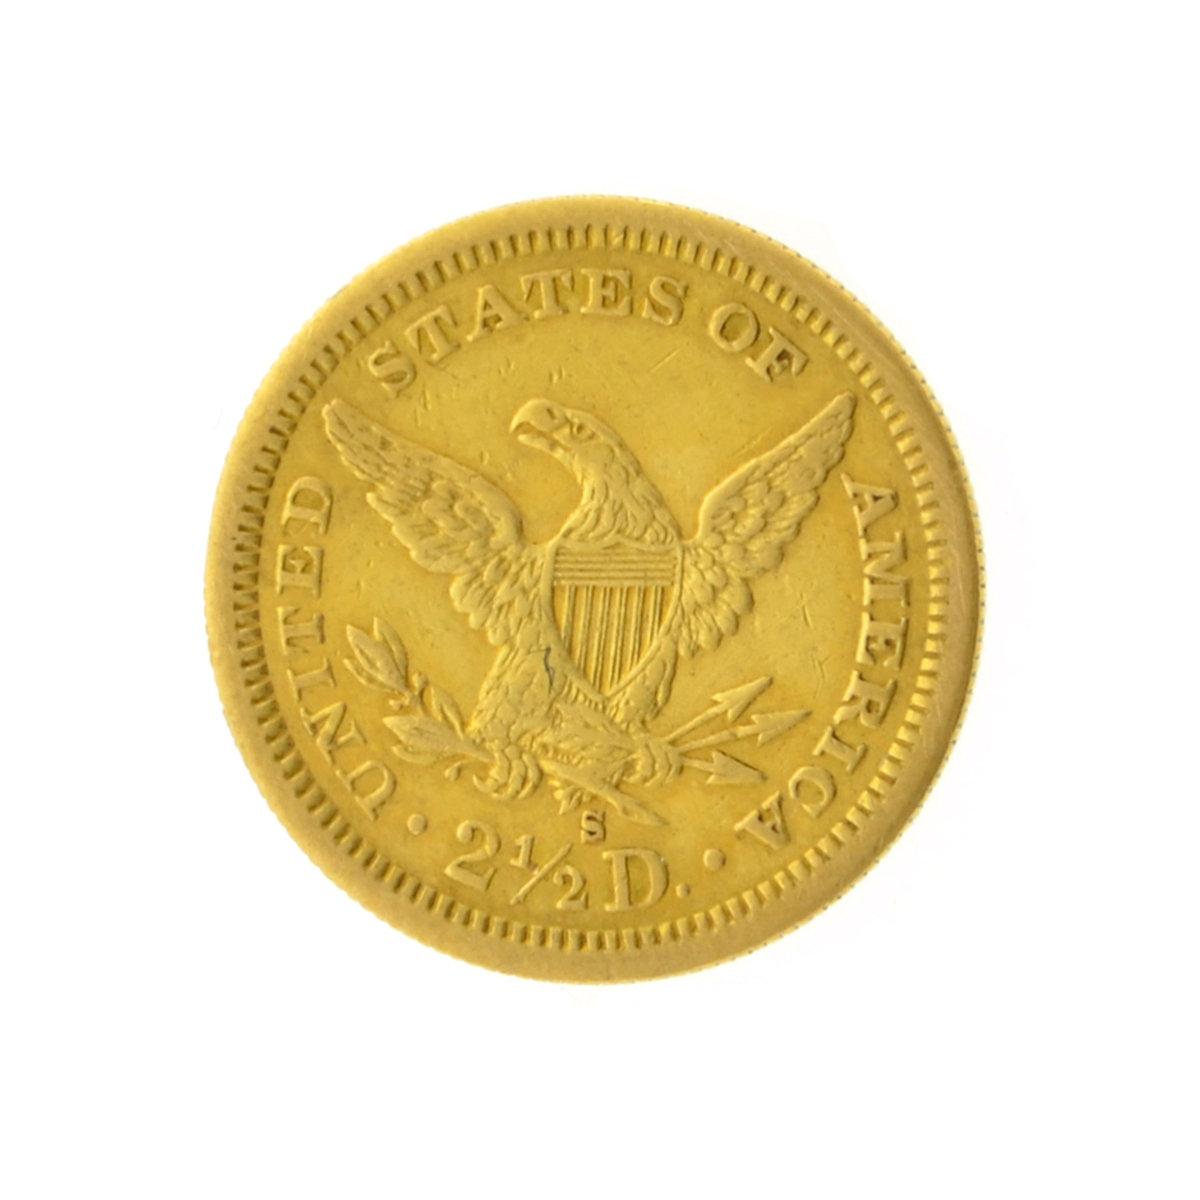 1877-S. $2.50 Liberty Head Gold Coin